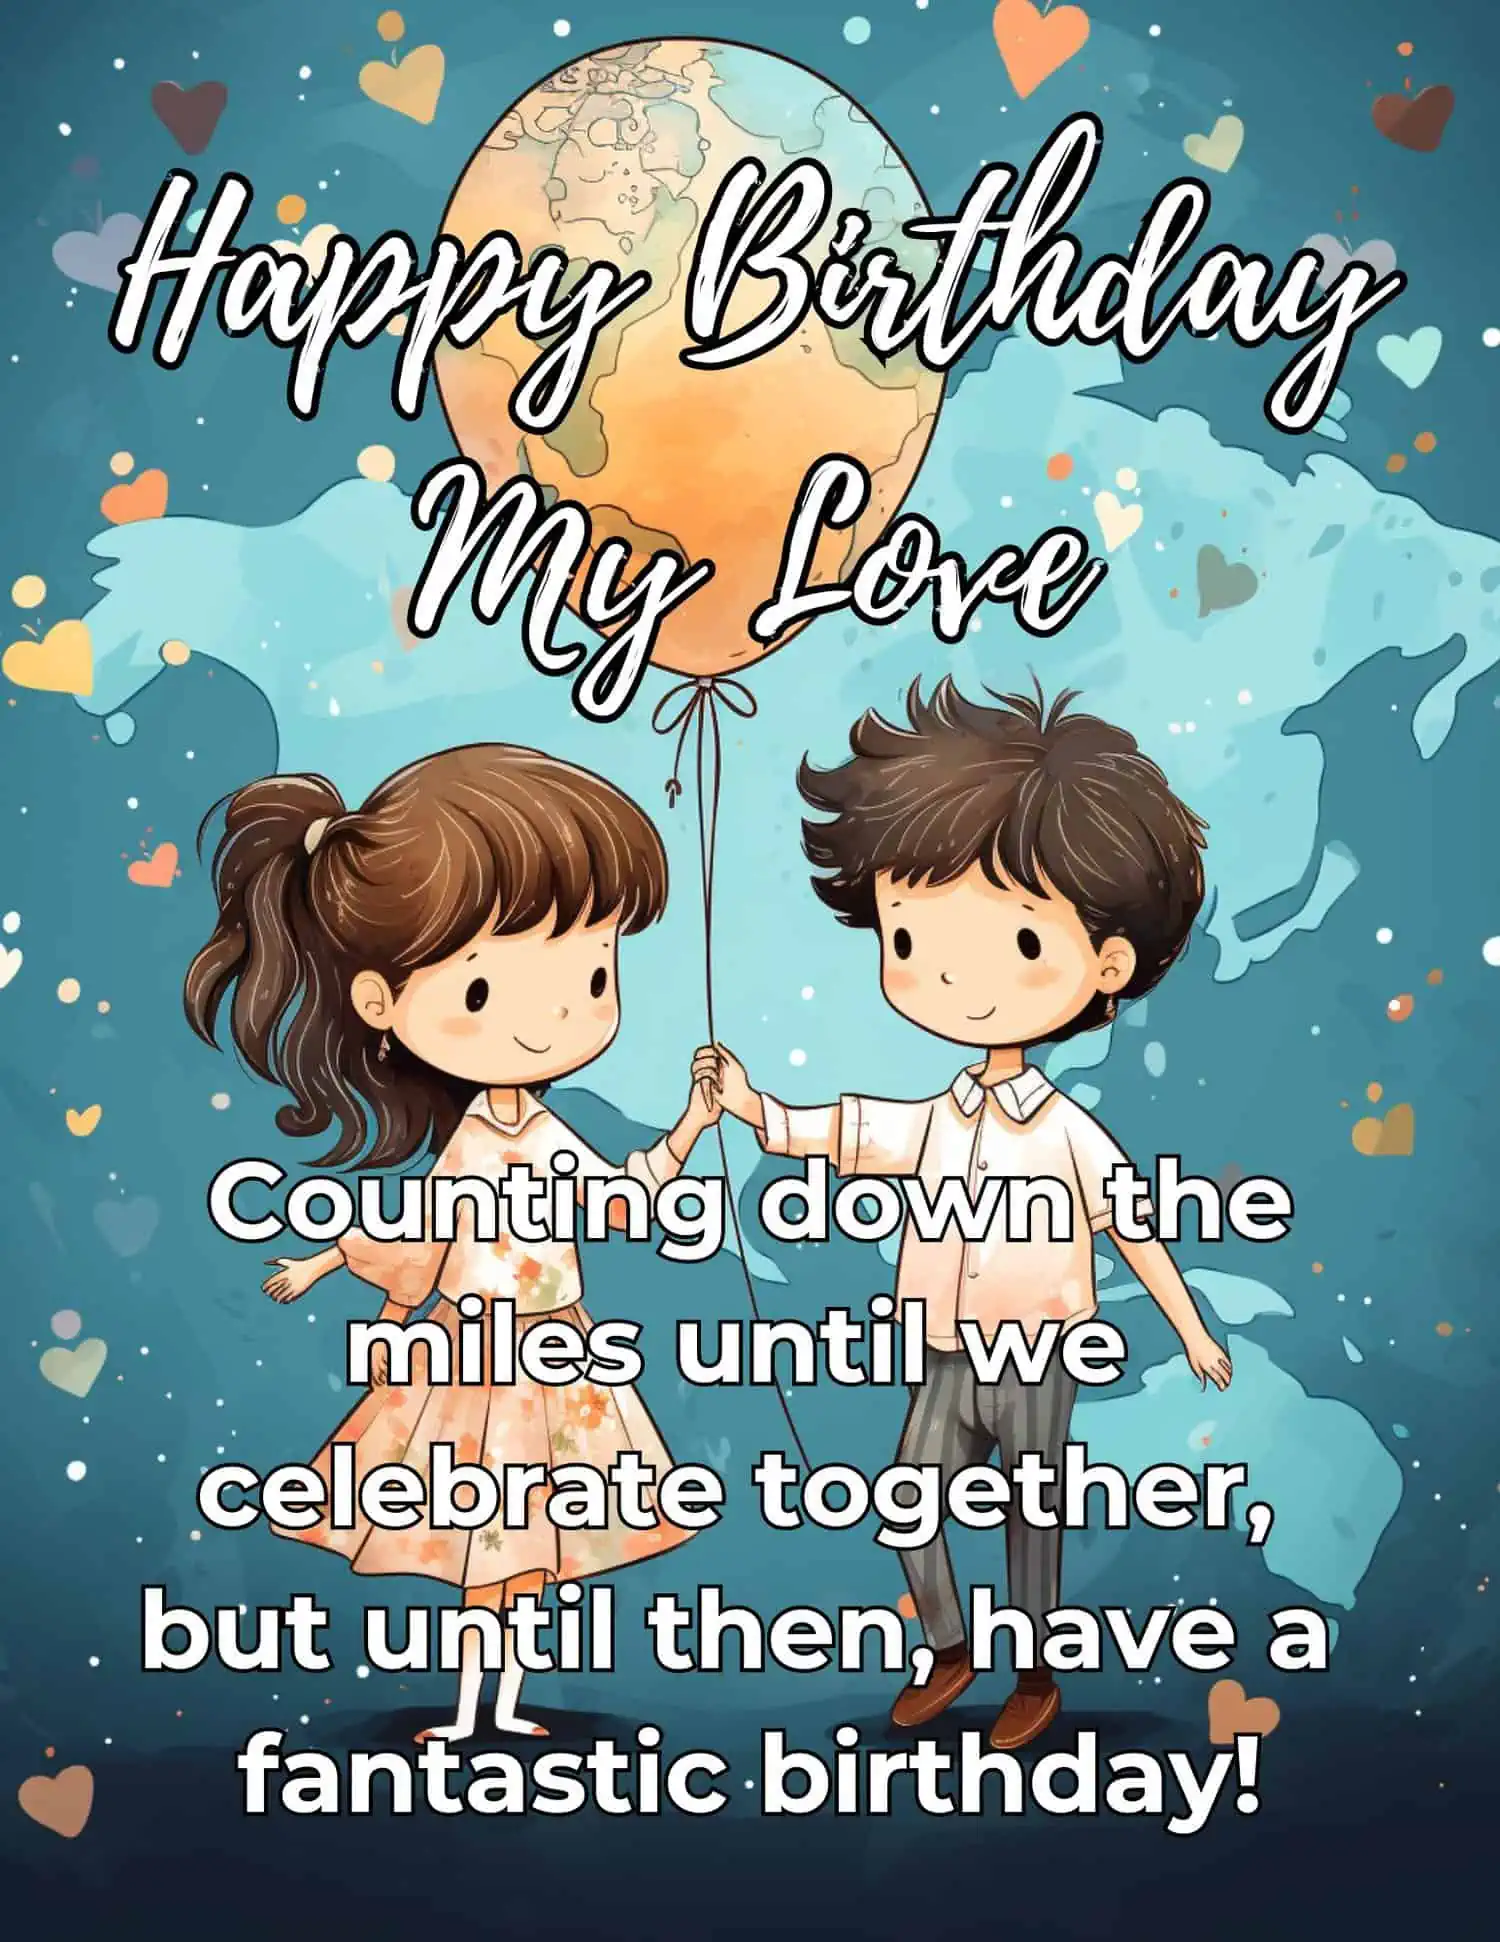 Heartfelt birthday messages that span the distance to make your boyfriend's special day memorable.